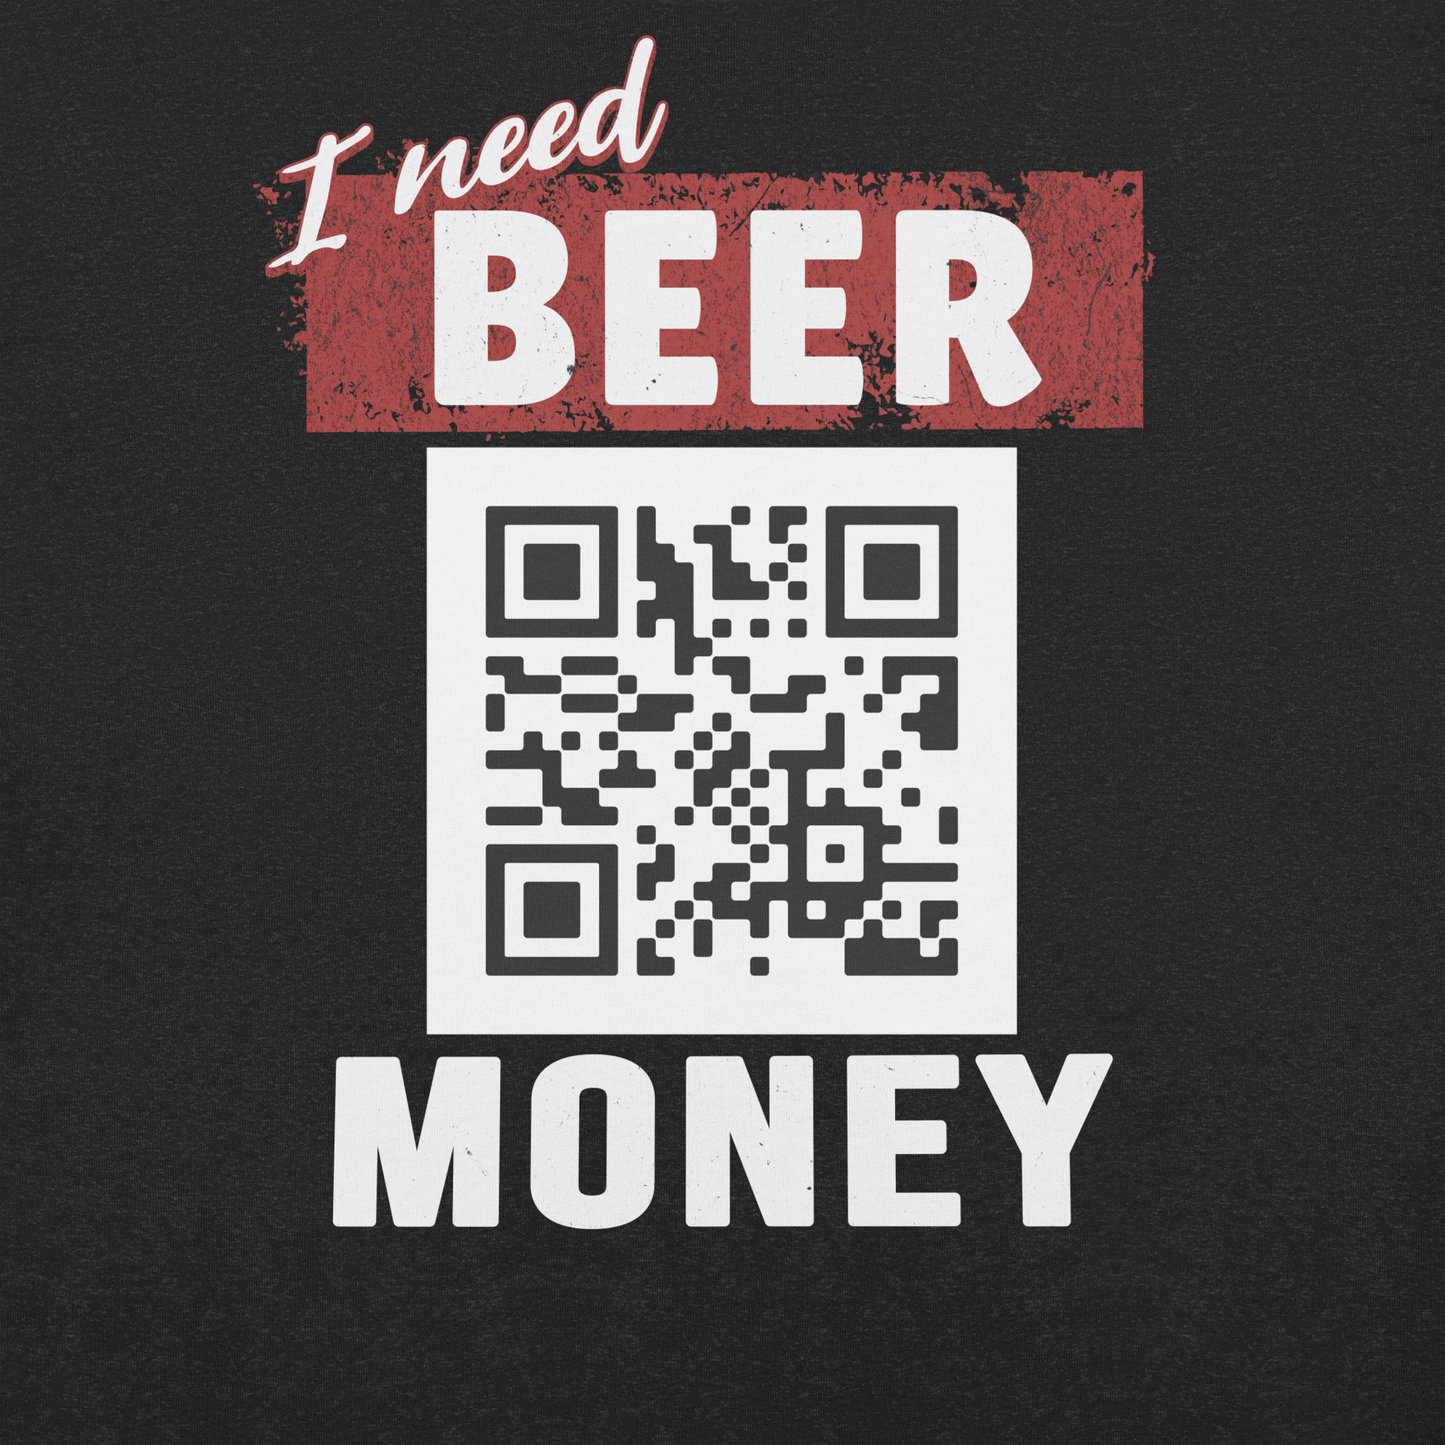 I Need Beer Money T-shirt - Personalizable